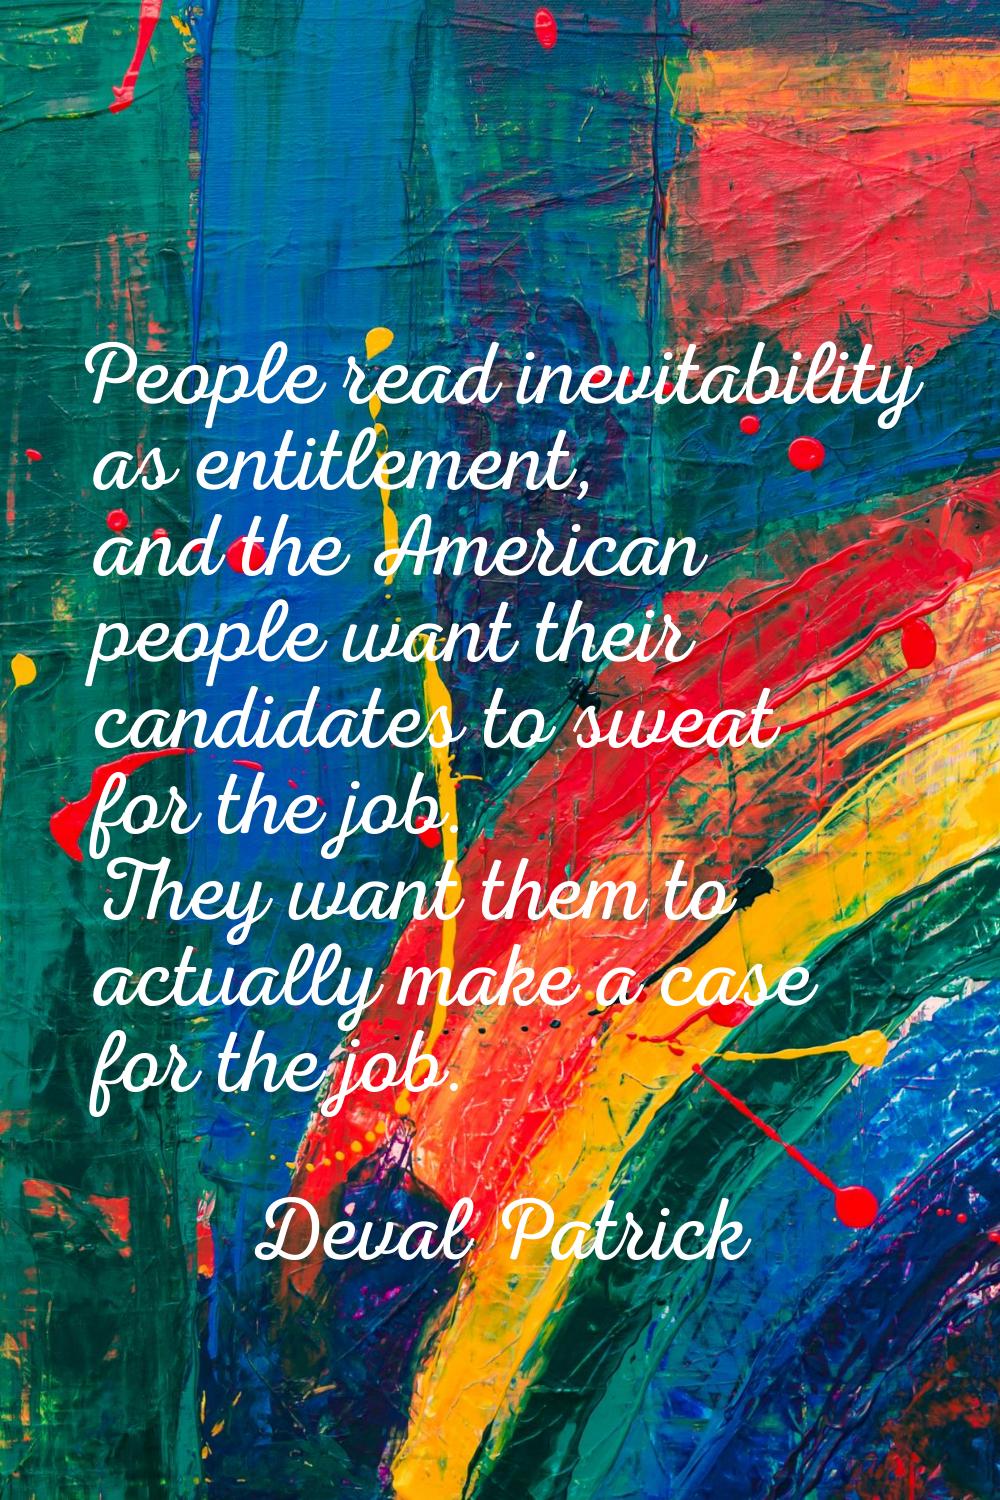 People read inevitability as entitlement, and the American people want their candidates to sweat fo